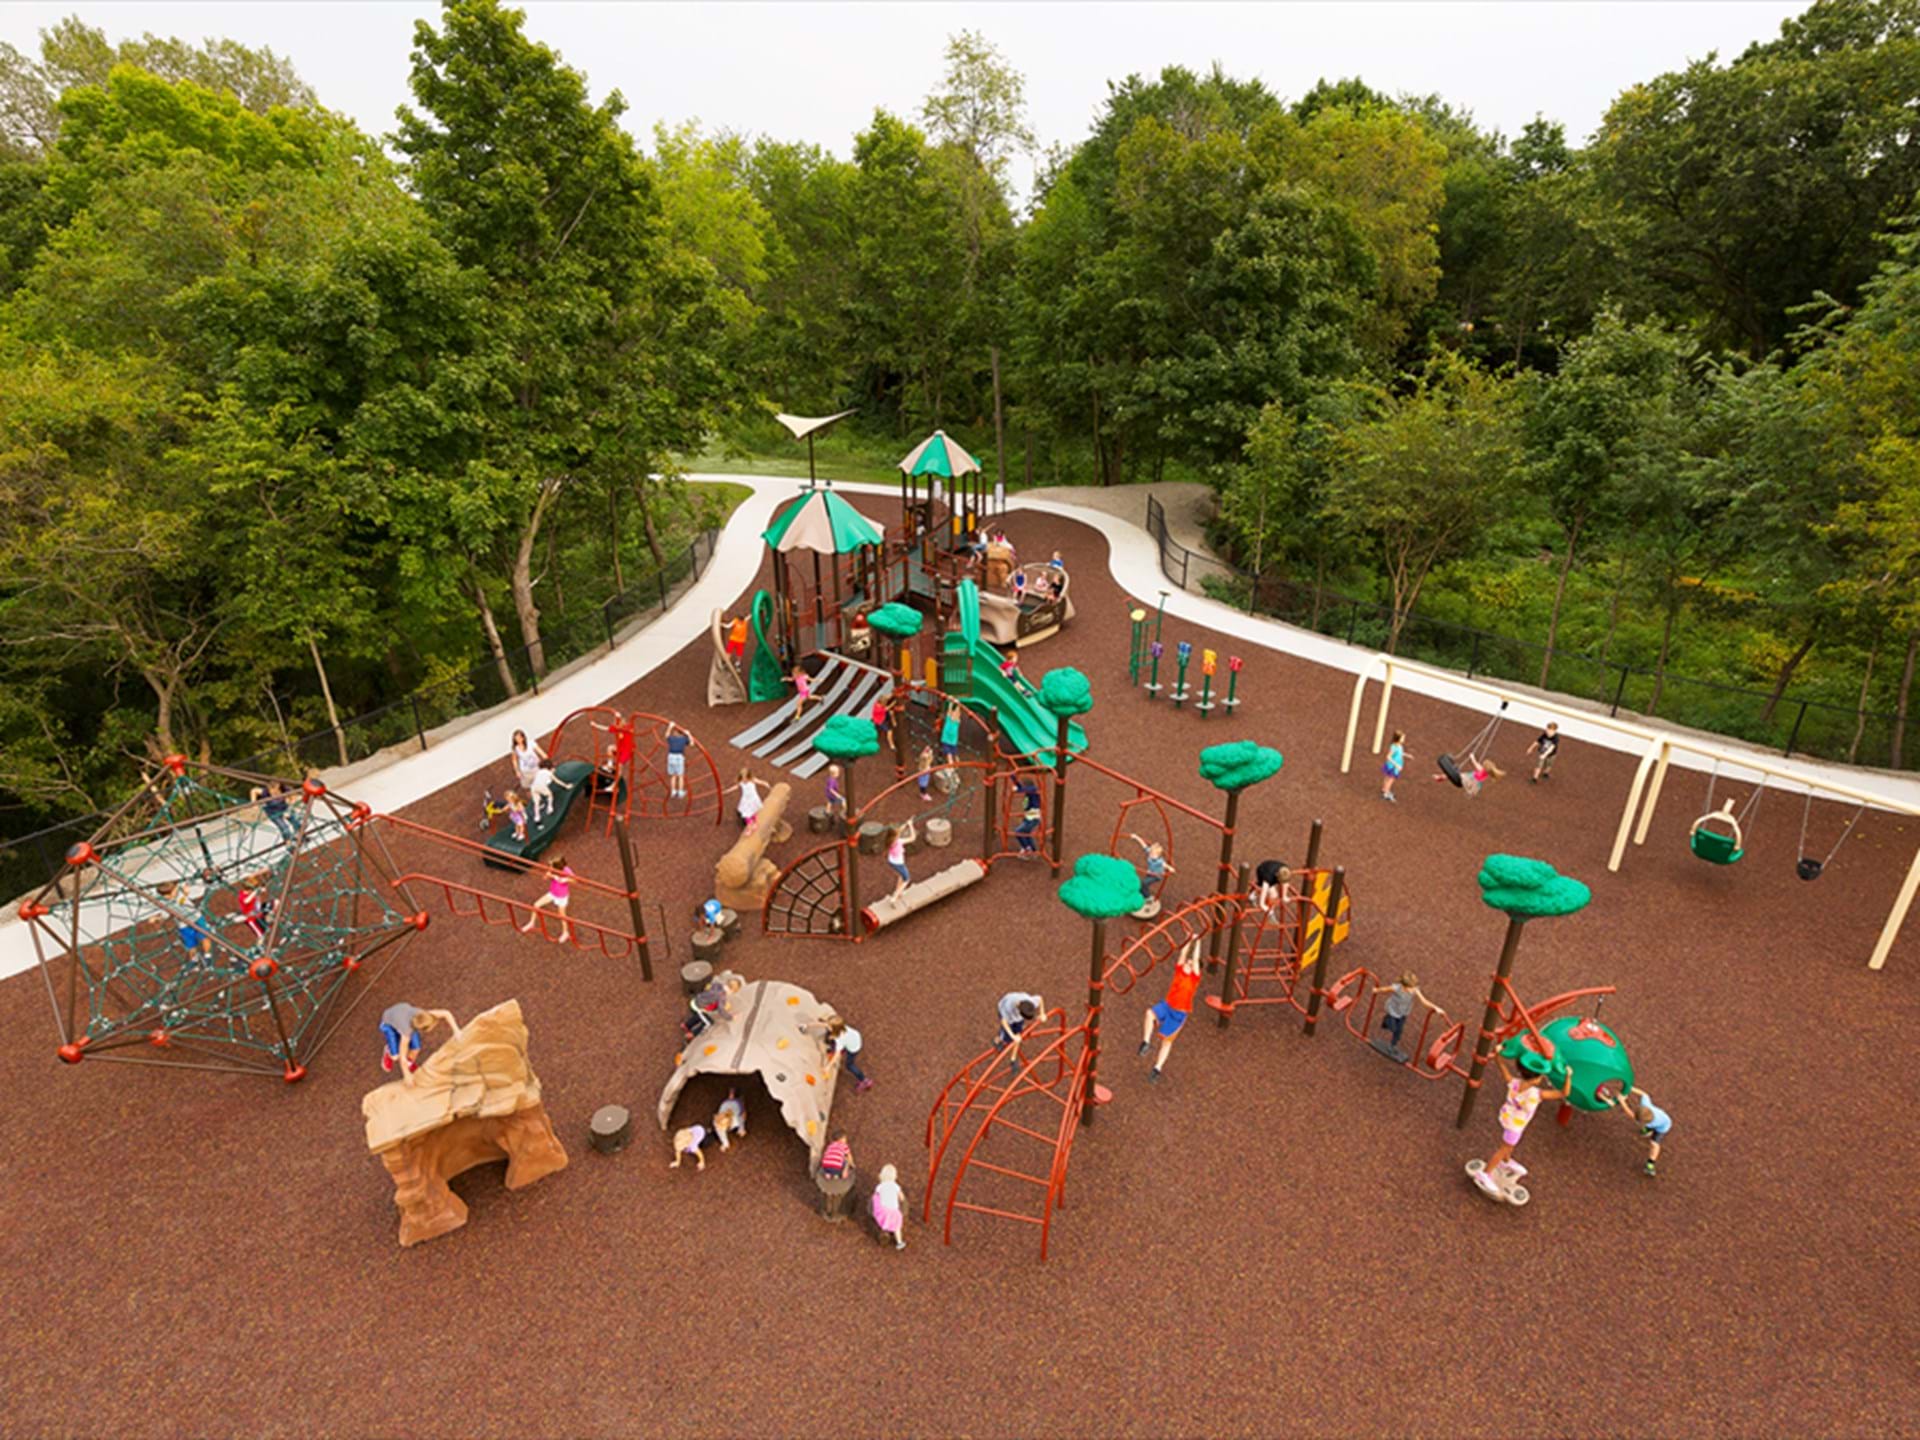 Modern playgrounds within the park near the campground